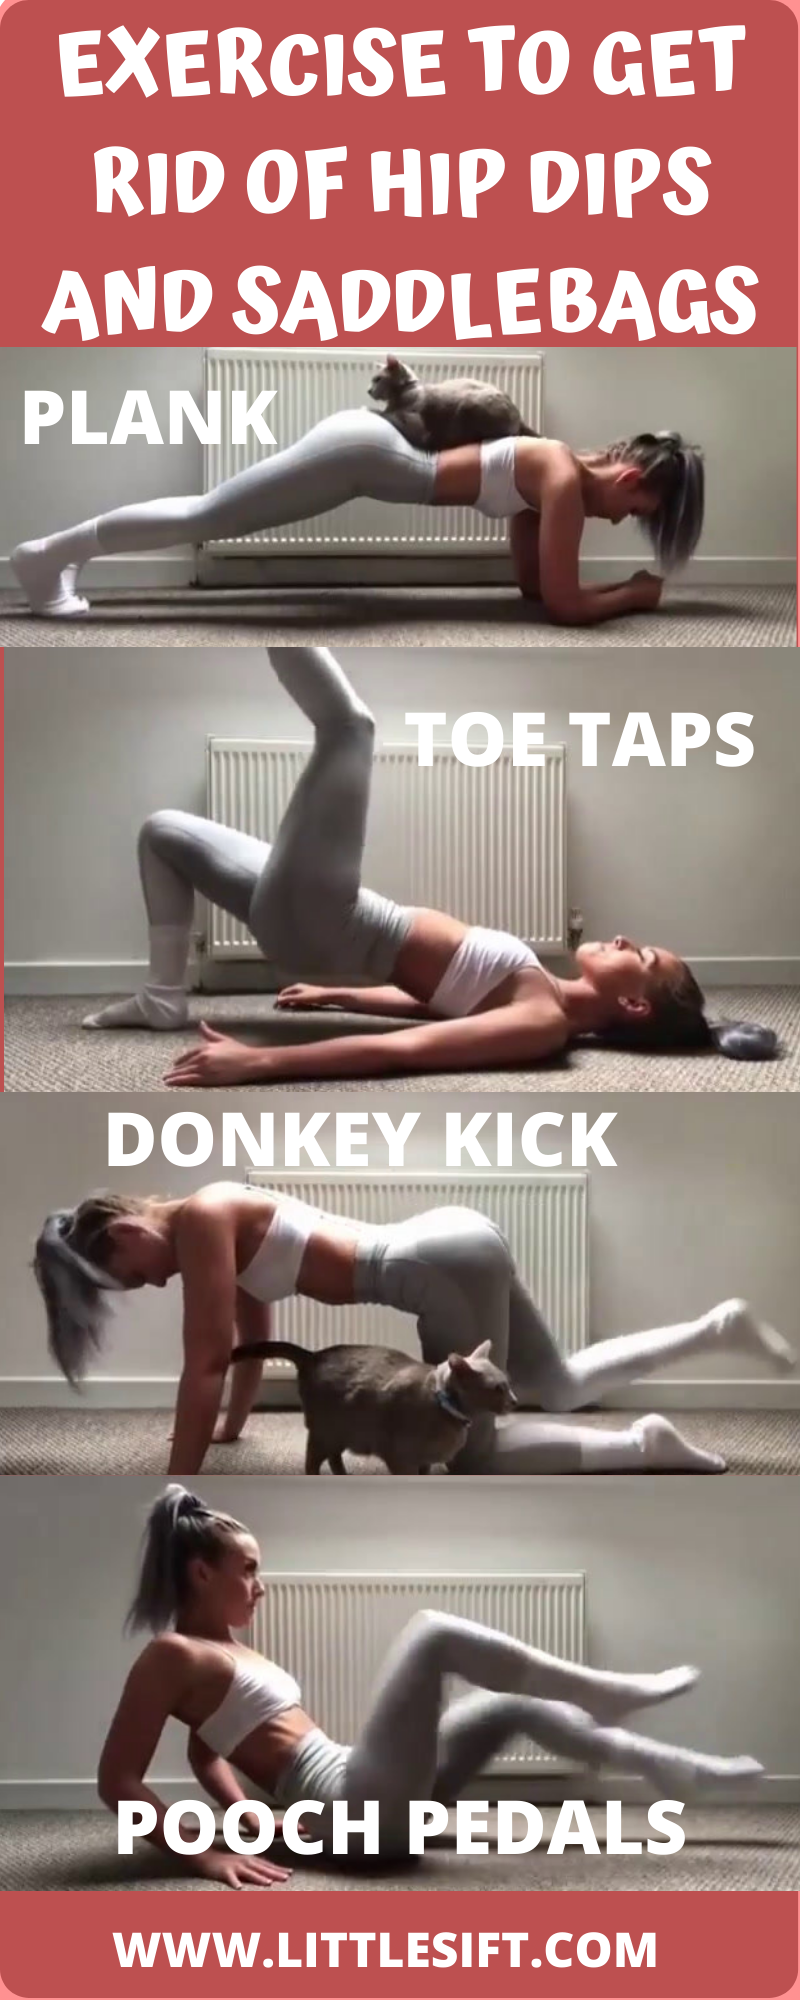 19 how to get rid of hip dips ideas